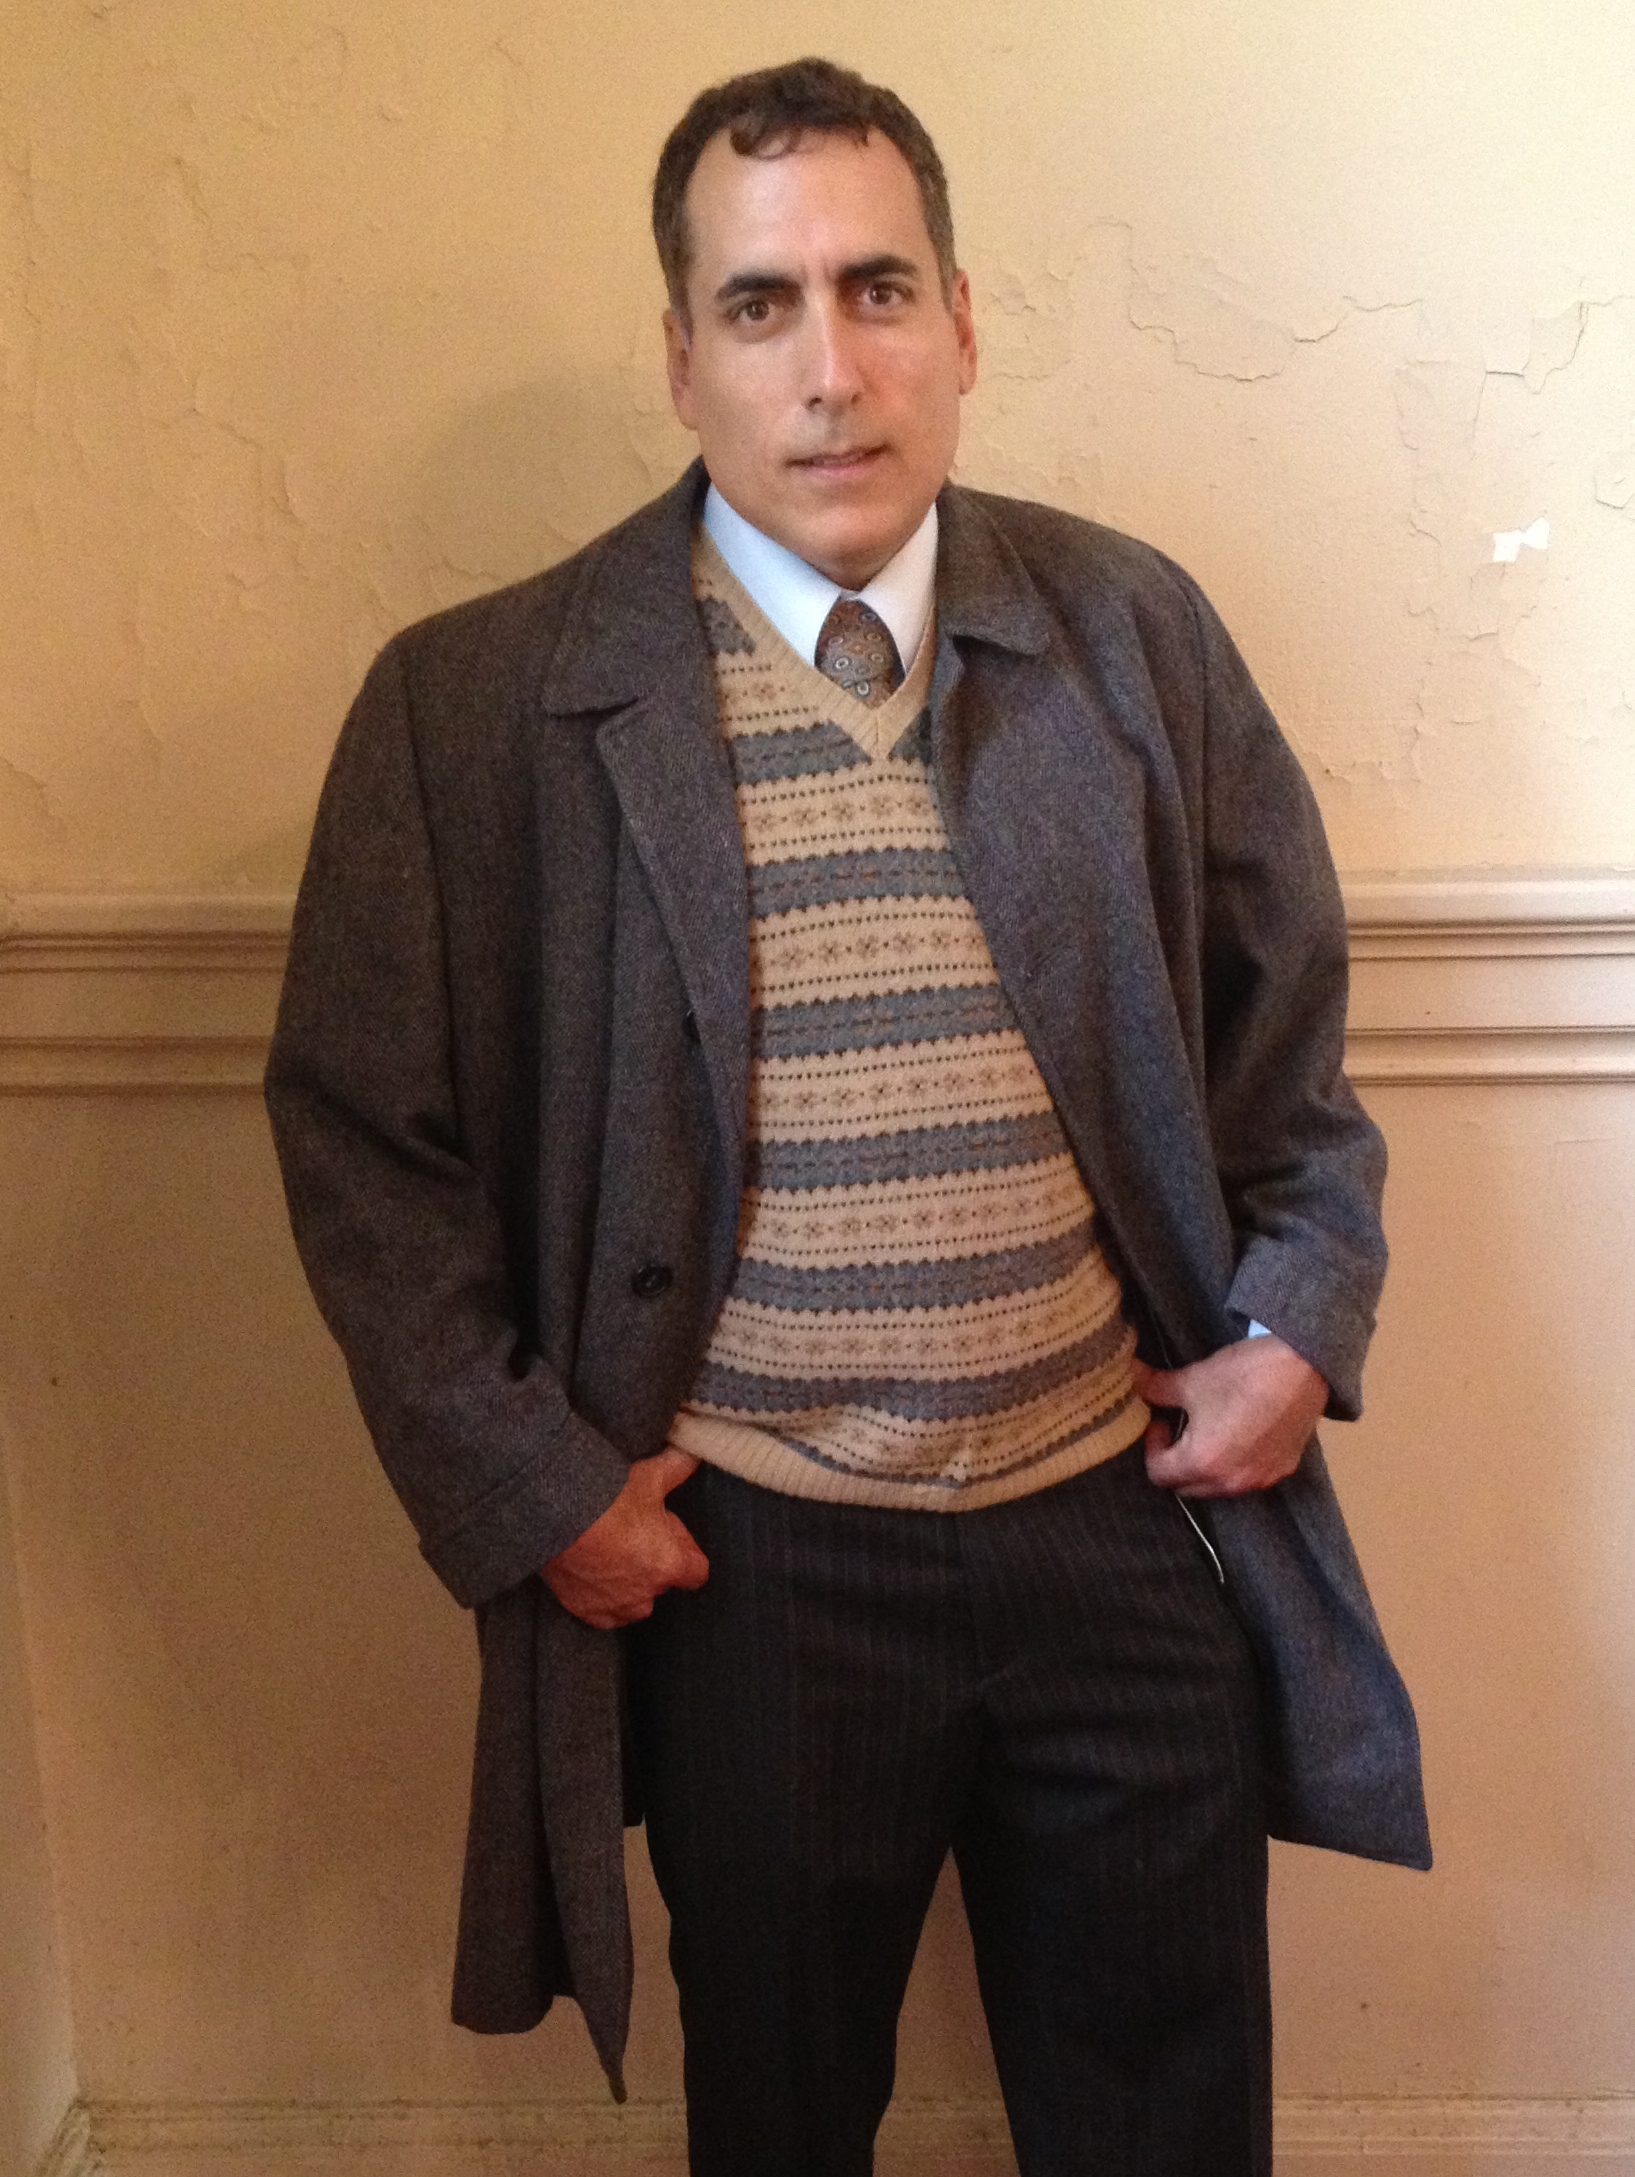 Damien Bosco as a 1930s Federal Agent on the set of Mysteries at the Museum.